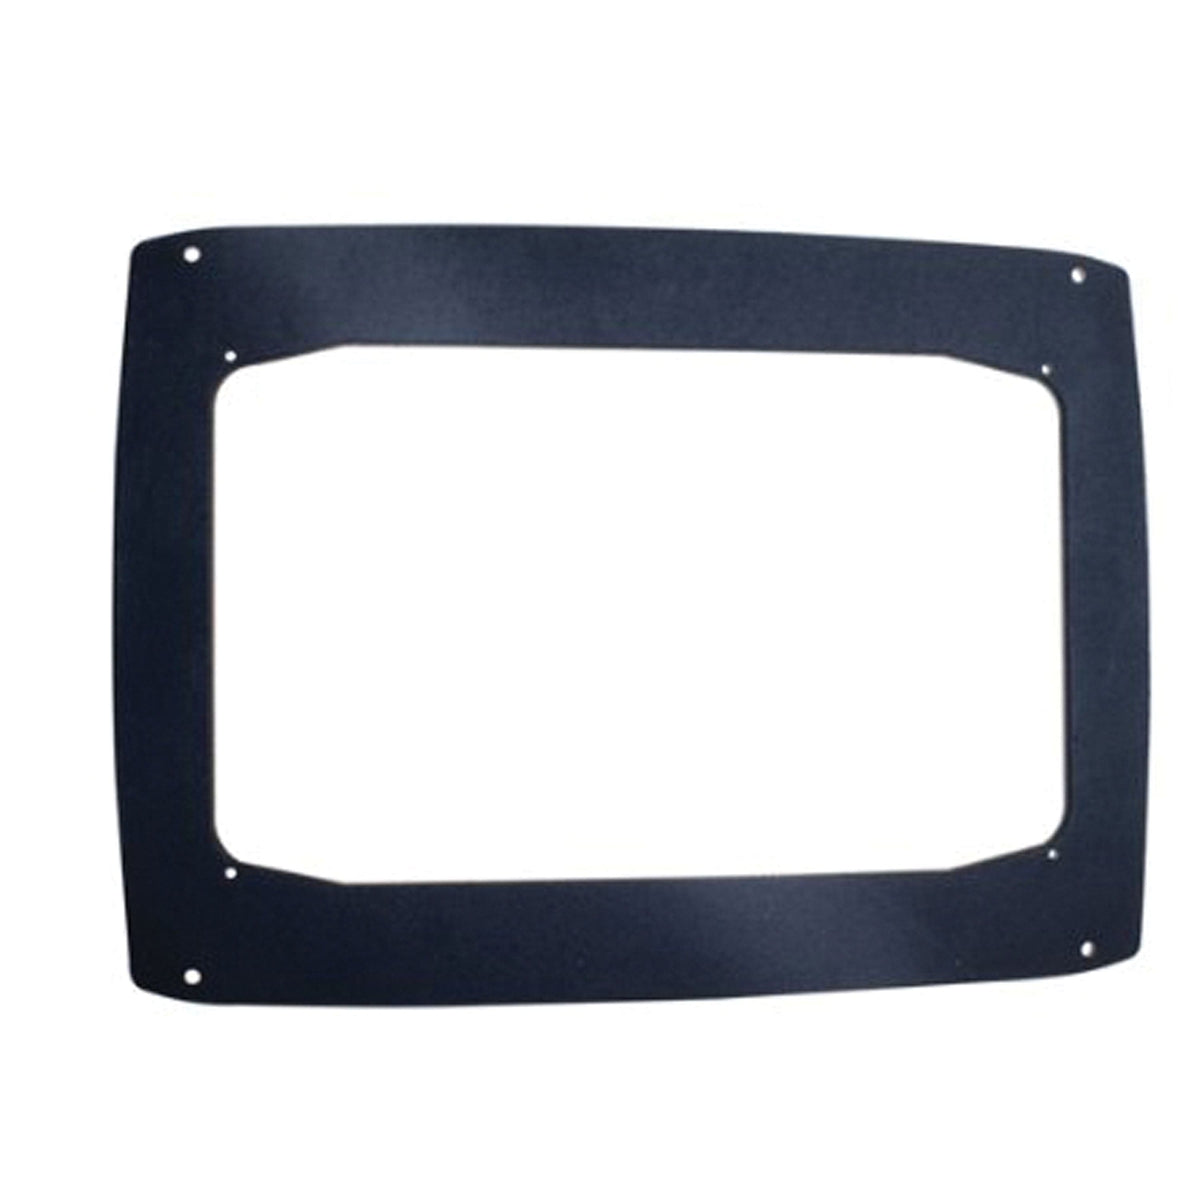 Lowrance Qualifies for Free Shipping Lowrance HDS-7/HDS-7 Touch Dash Mount #000-11115-001